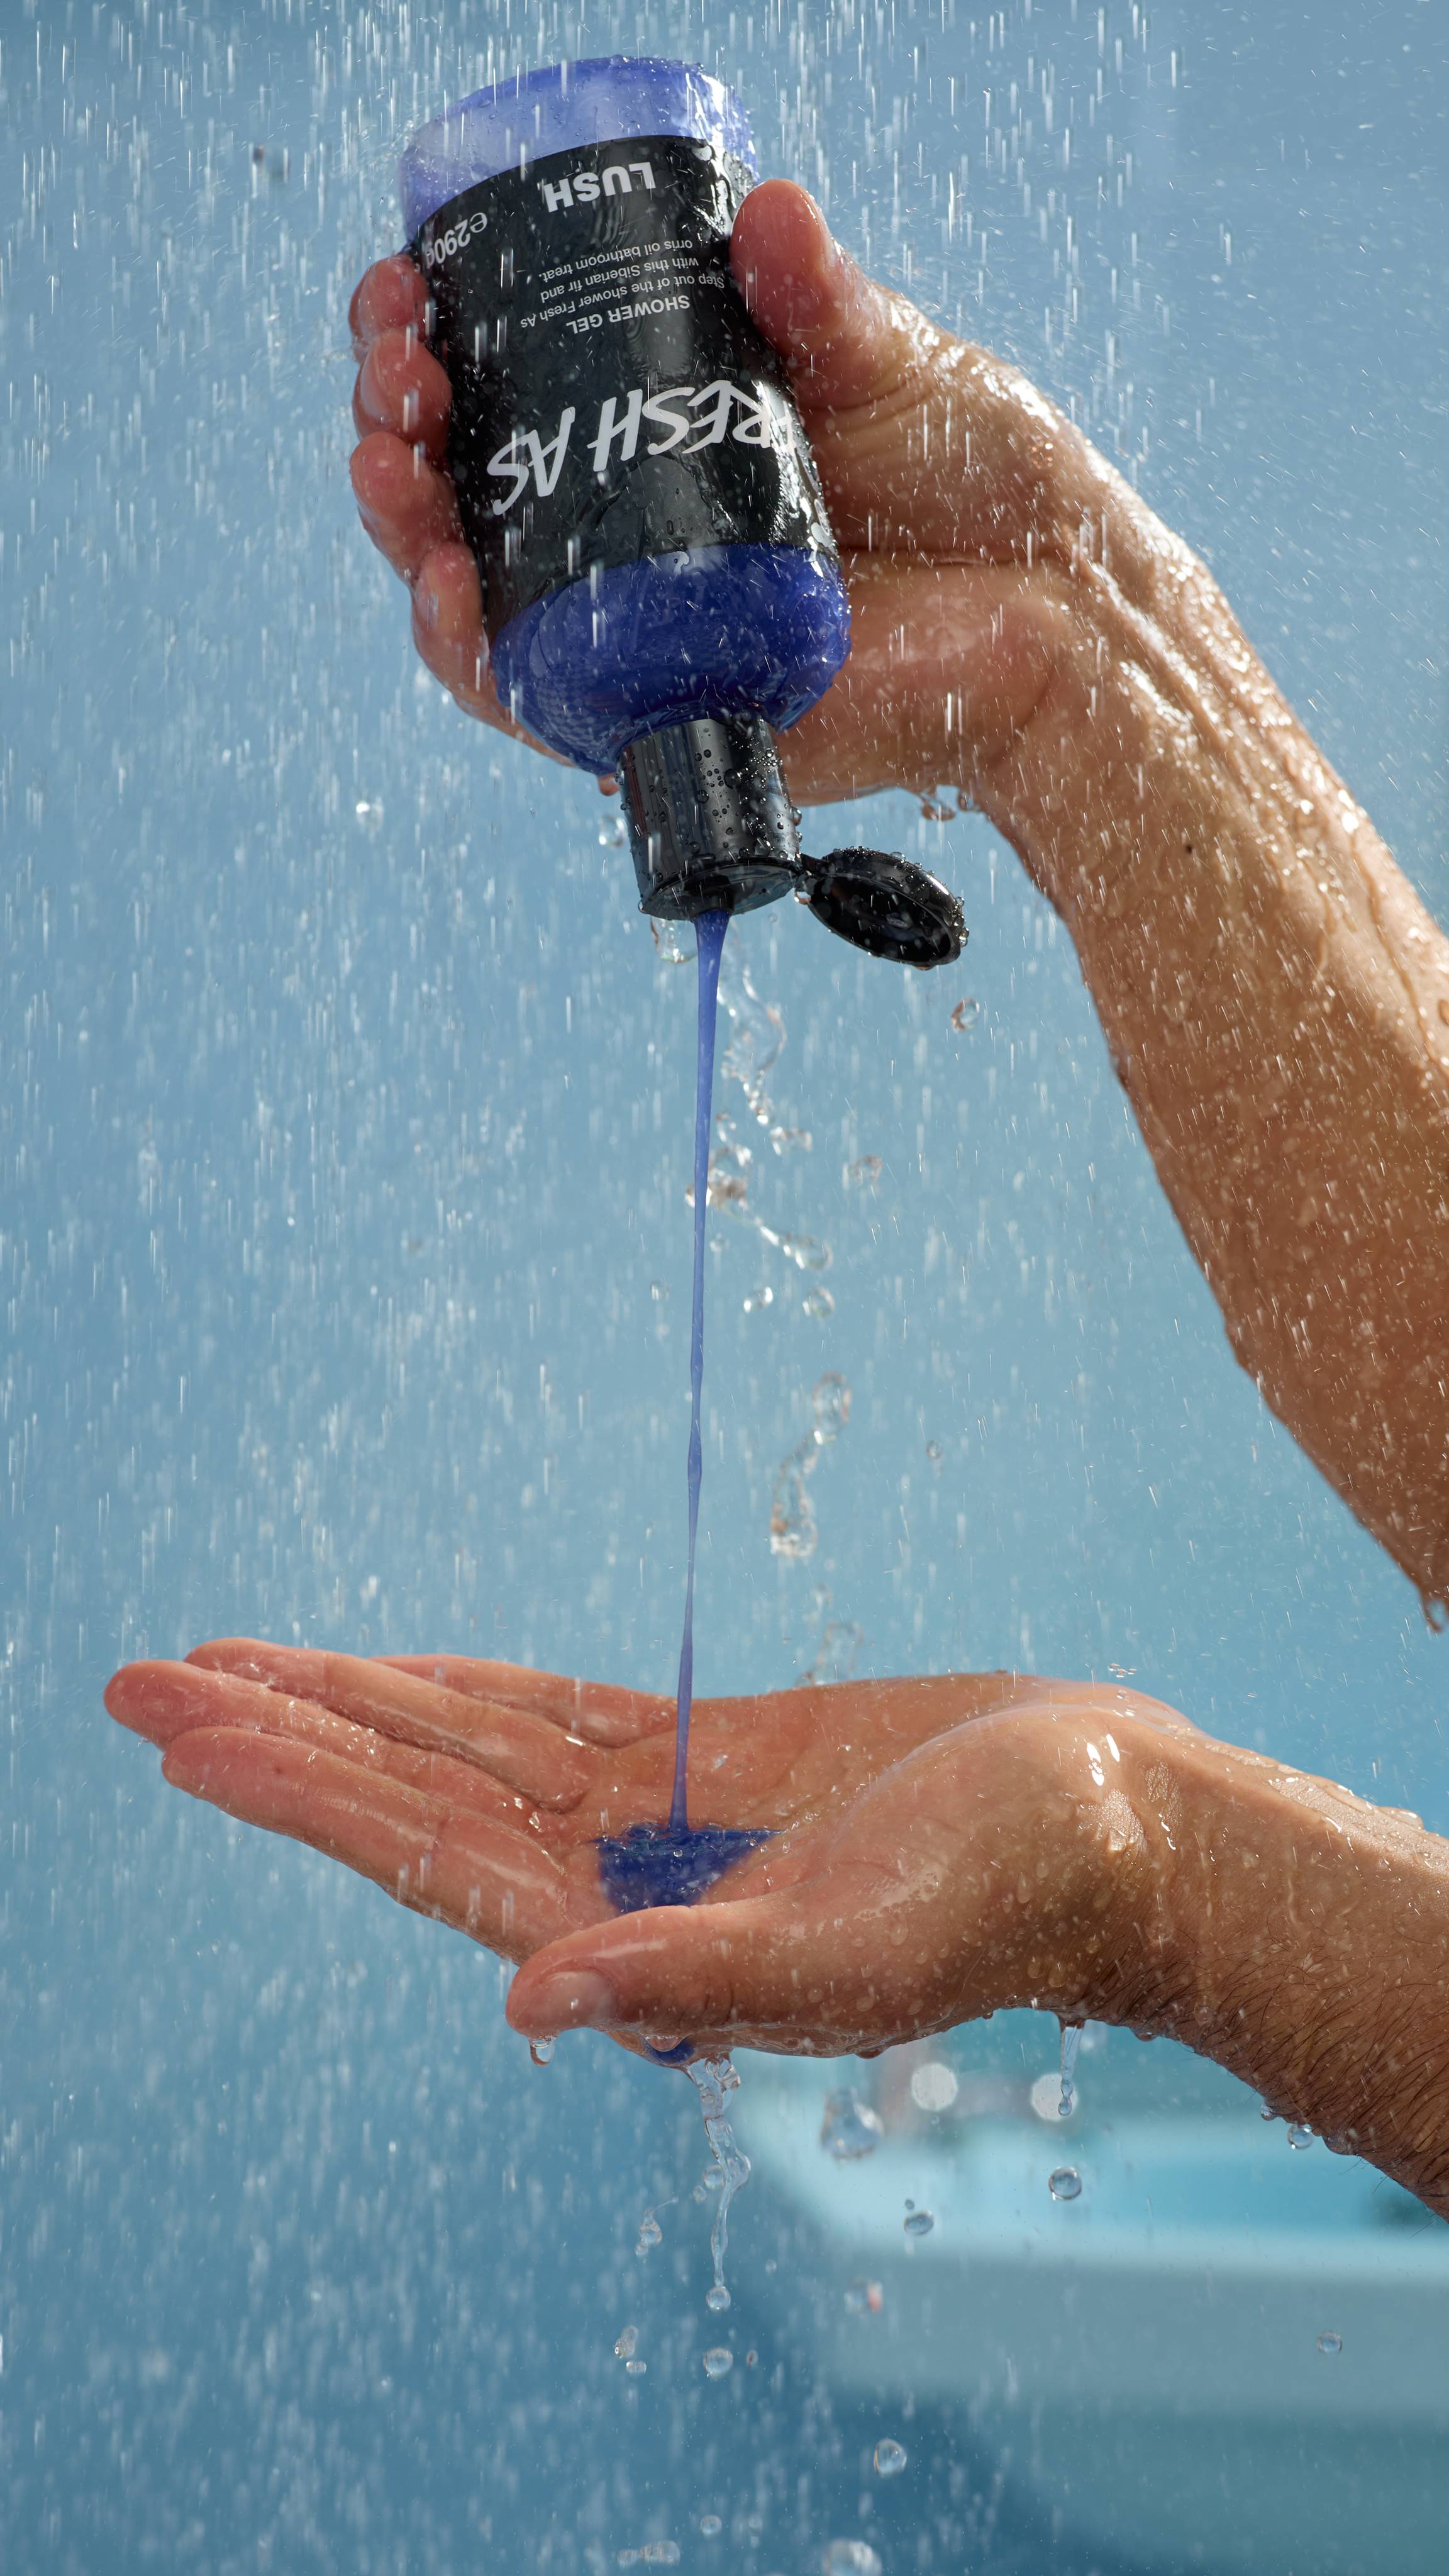 A hand holds the pooling, blue shower gel as it is poured from above, with a light-teal background and unfocused water drops.